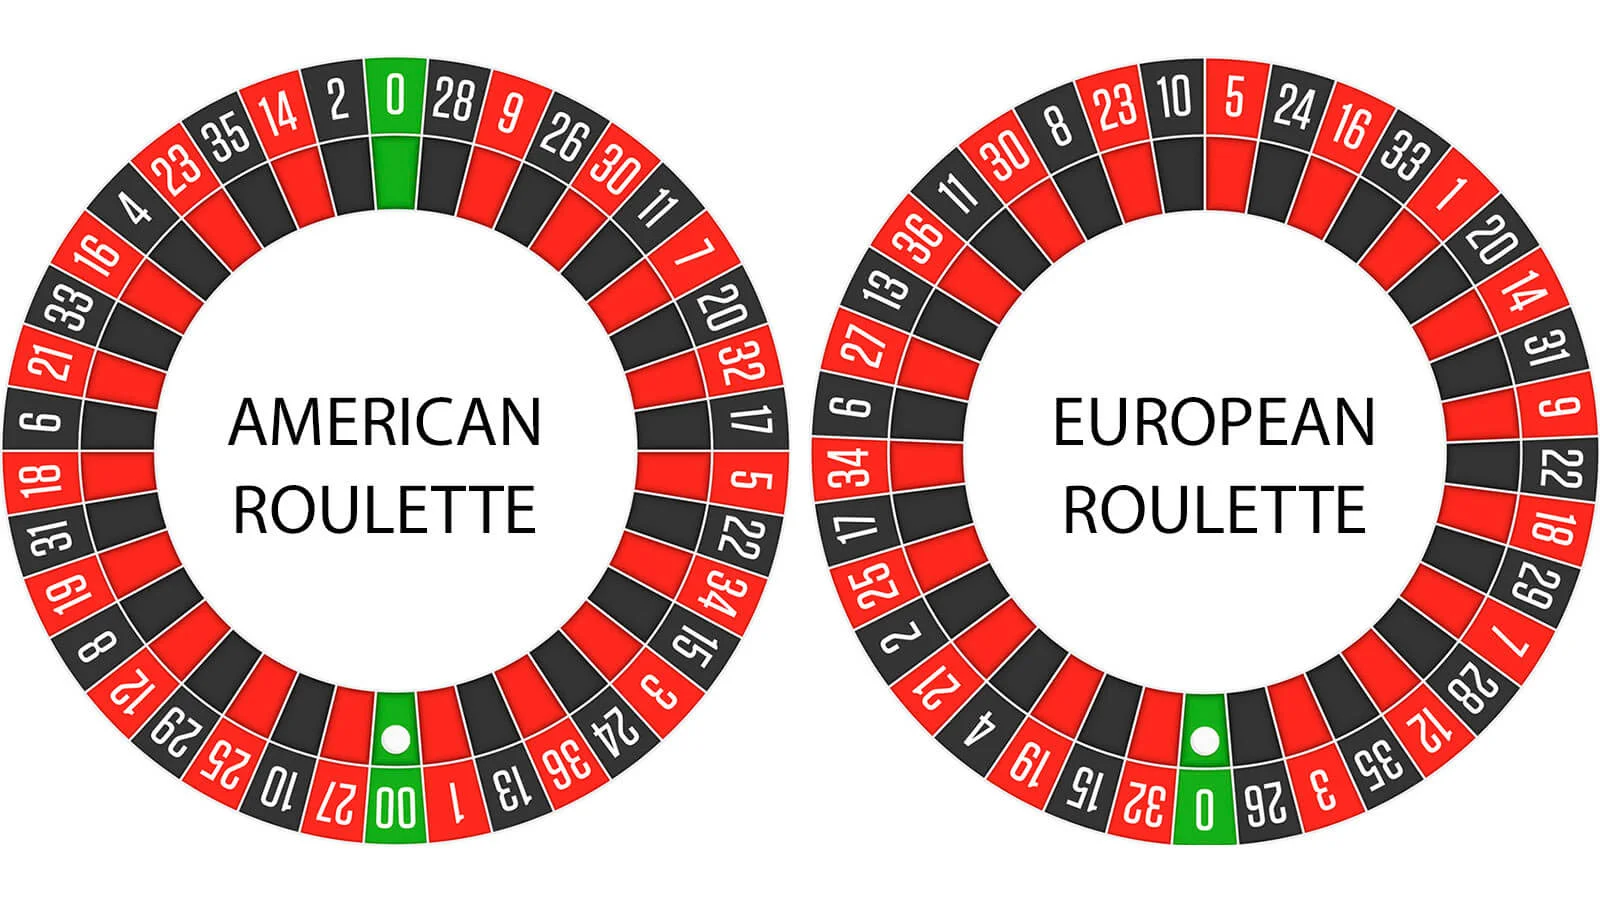 What is the difference between American and European Roulette?